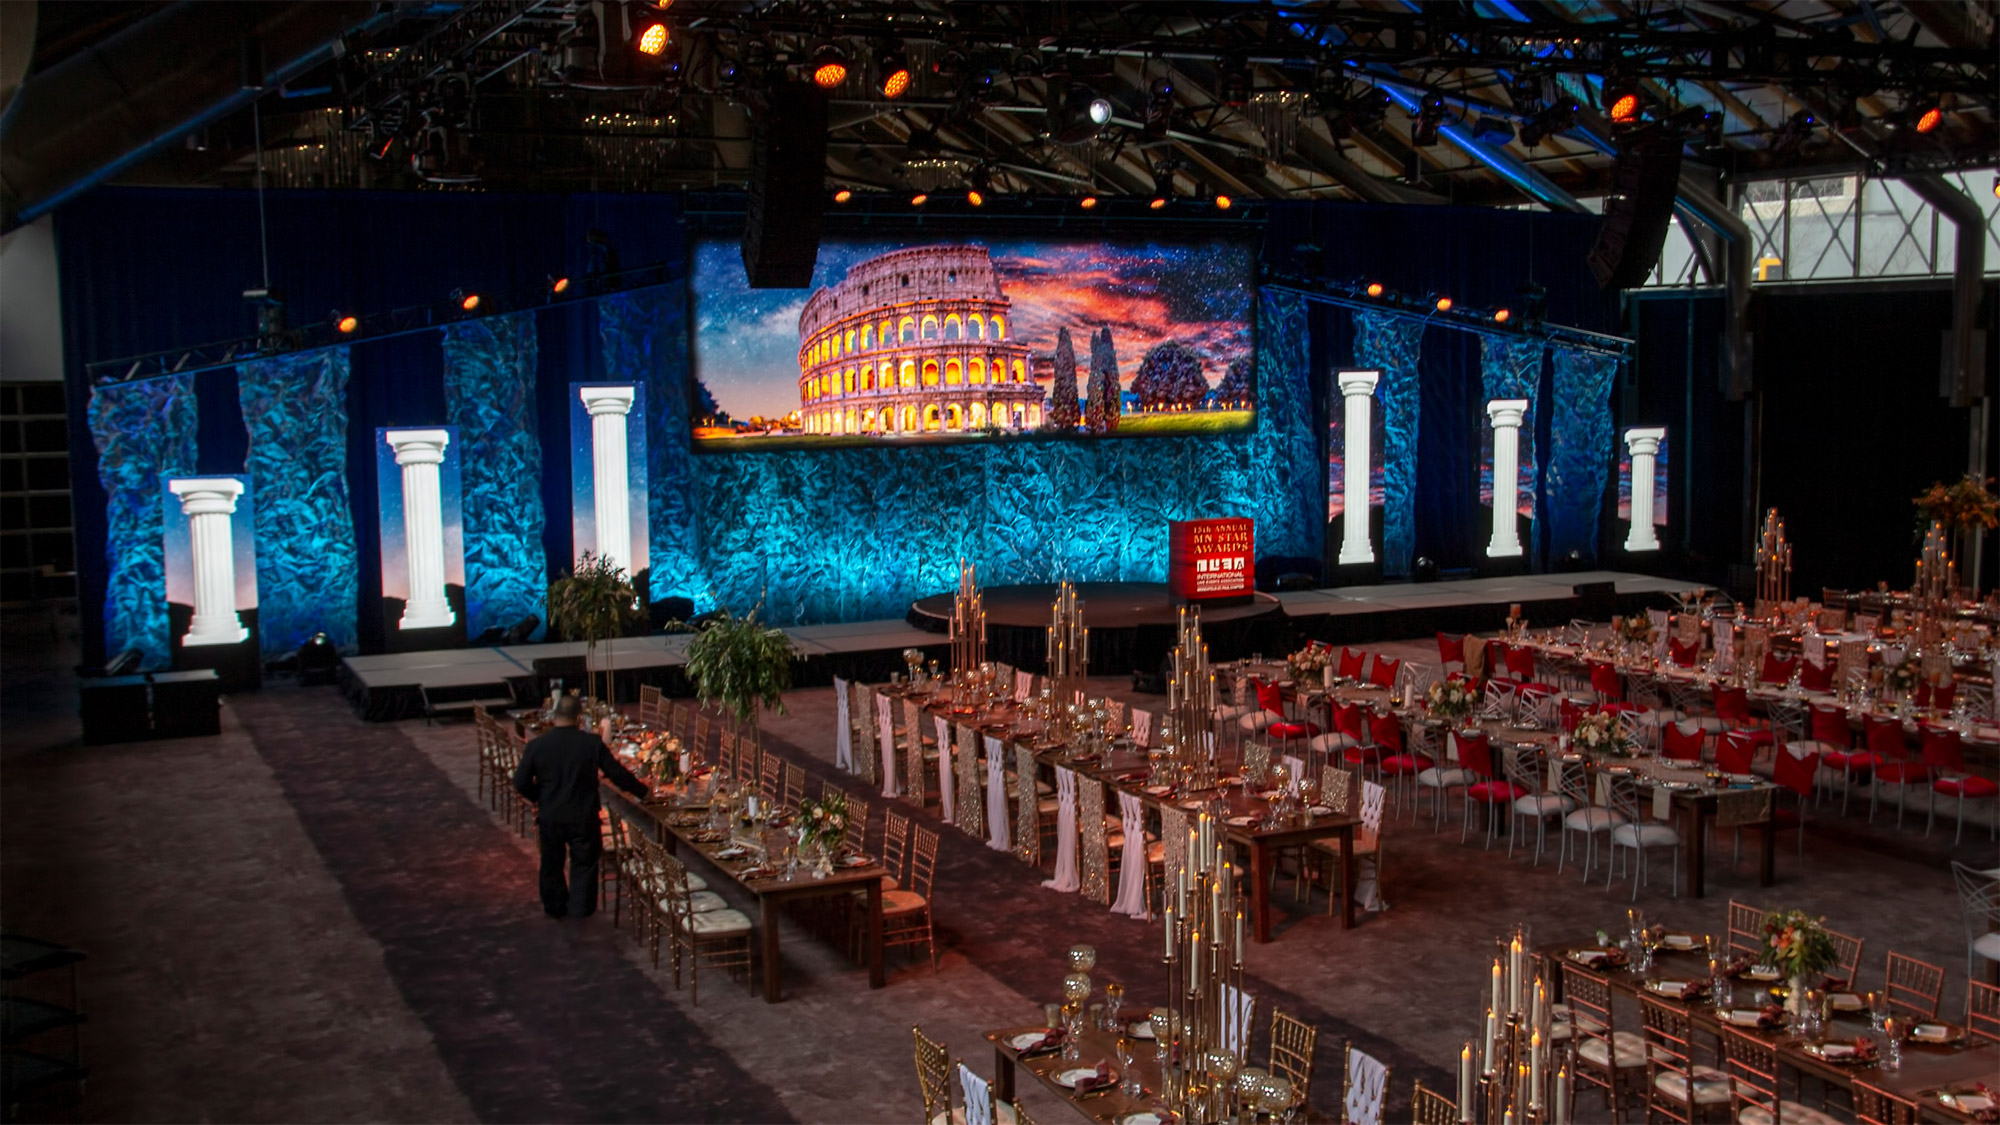 Digital Projectors, LCD Screens, or LED Panels: Which is Right for my Event?